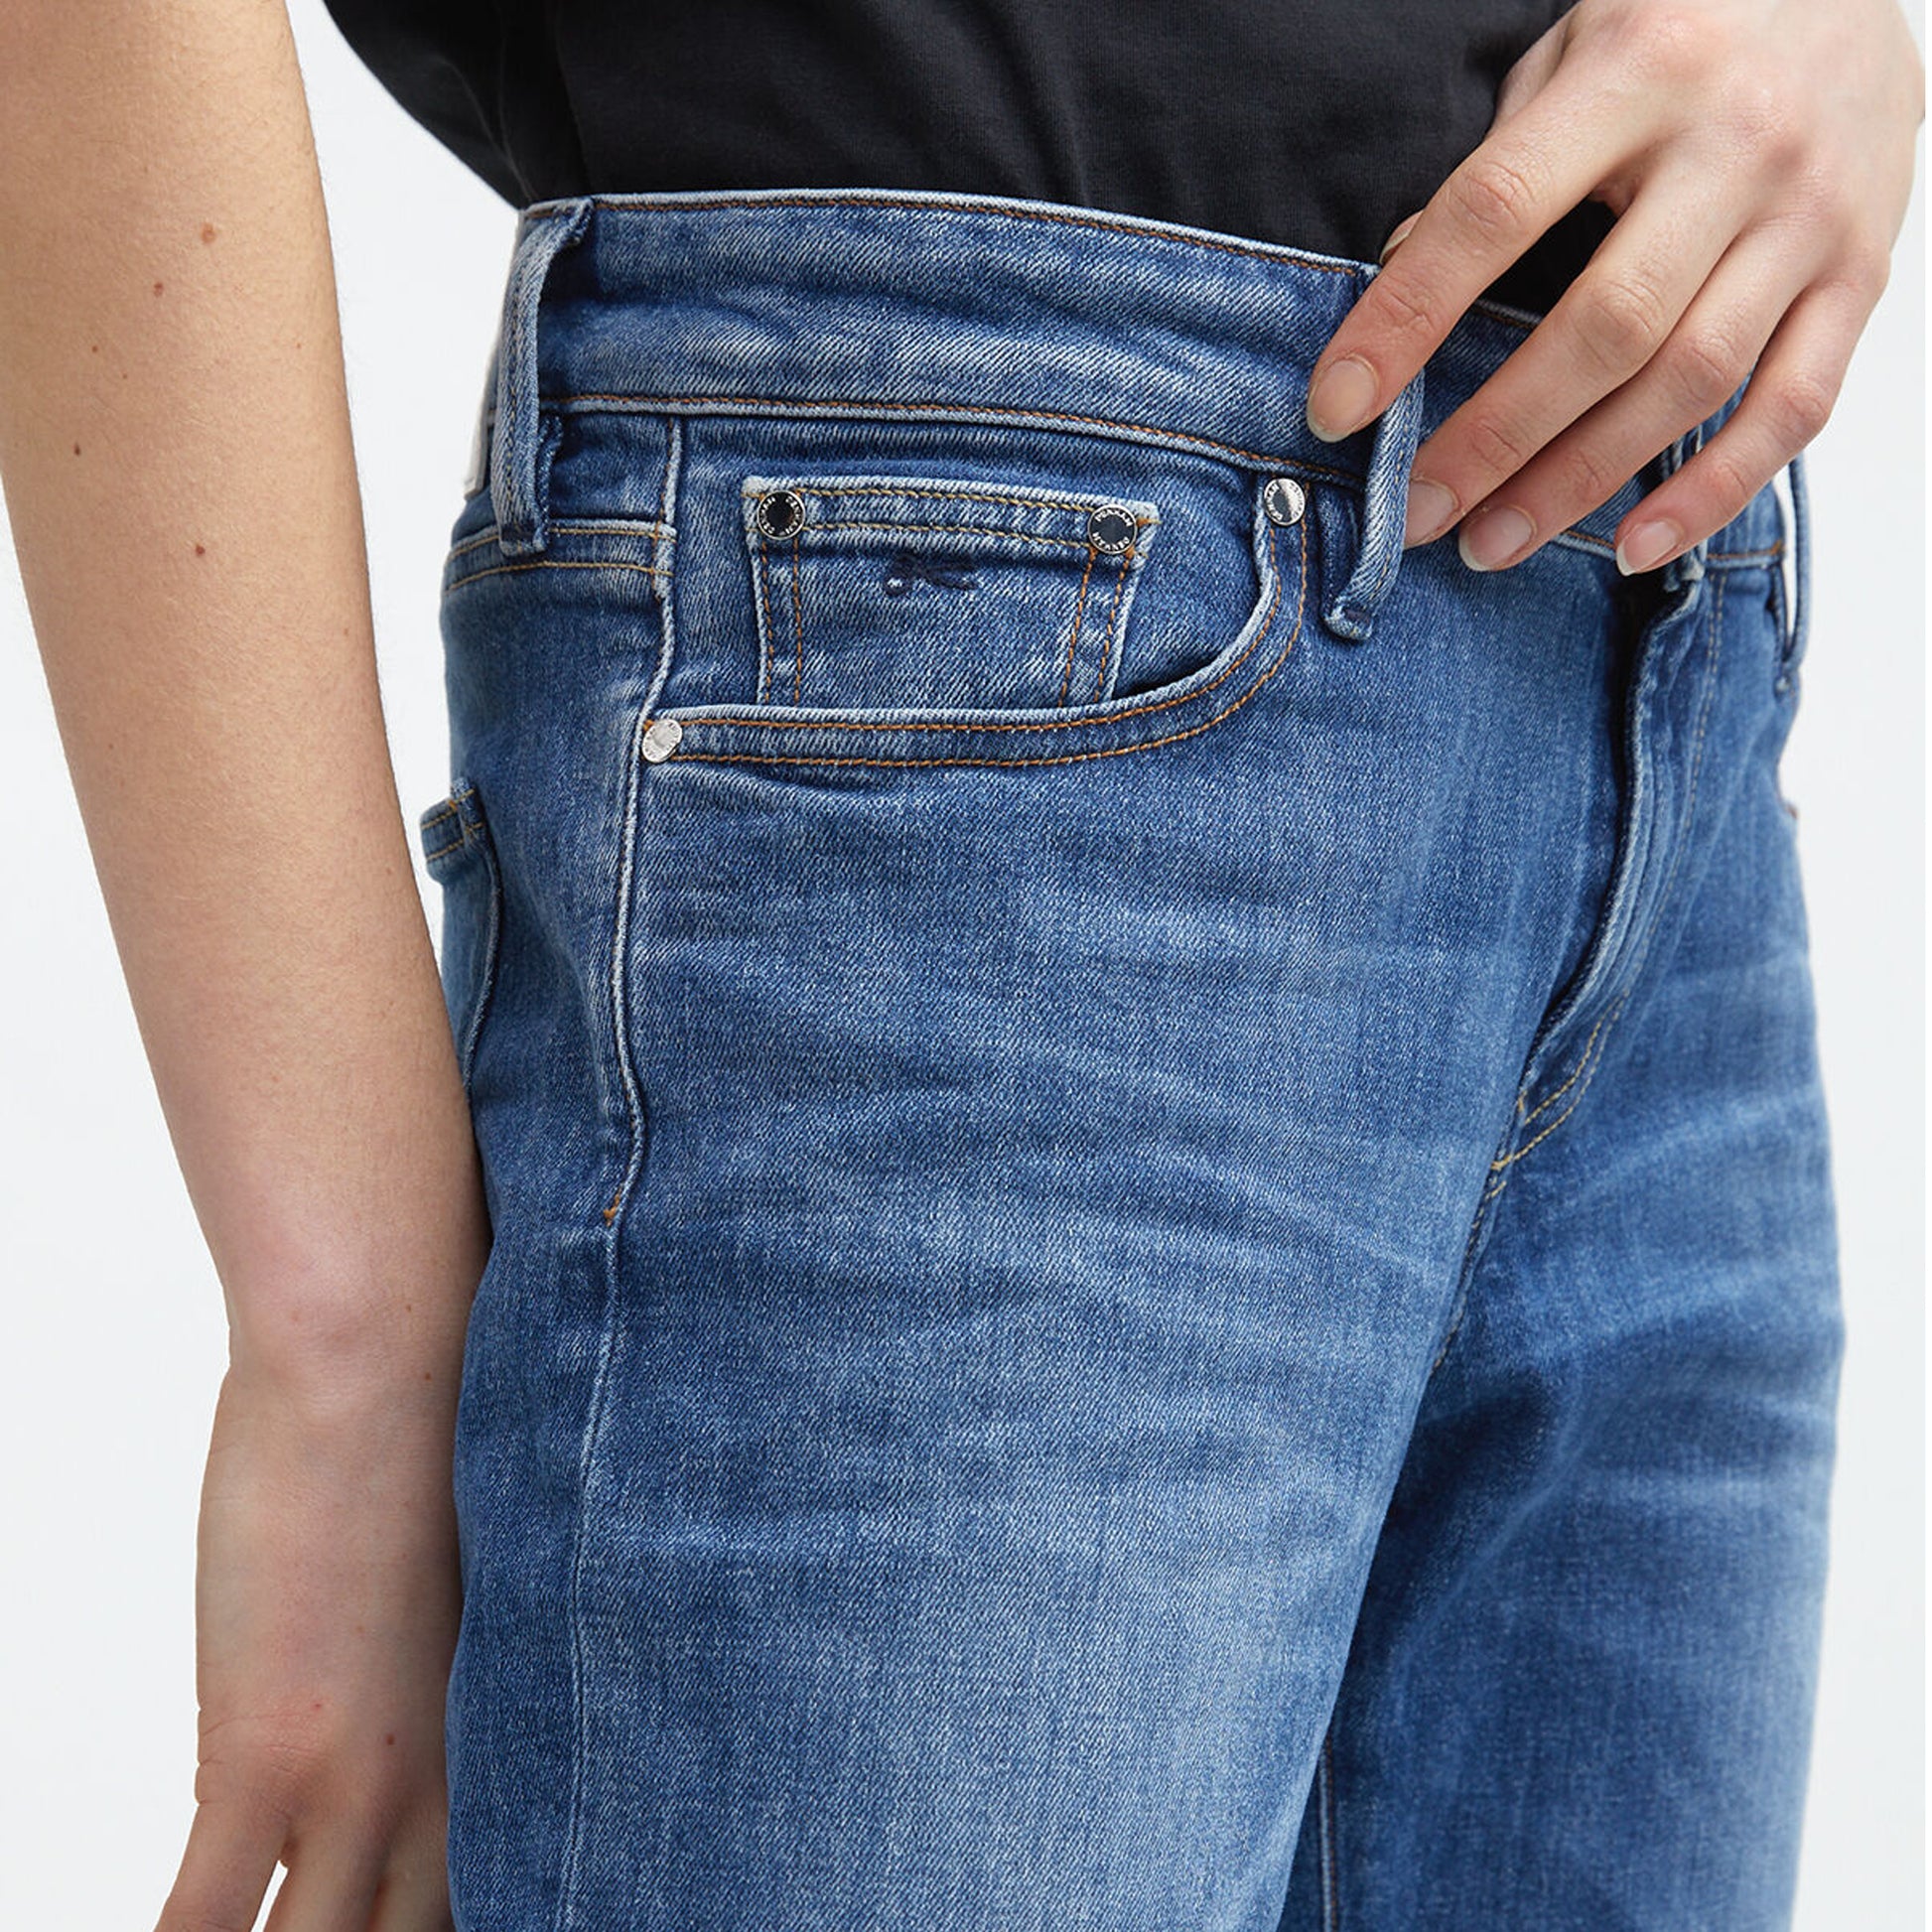 The Denham MONROE Mid Girlfriend - Light Fade & Whiskers Jeans for women are made from comfort stretch denim and feature a convenient pocket on the side. These stylish jeans are crafted in collaboration with our Italian partner mill, ensuring top quality.